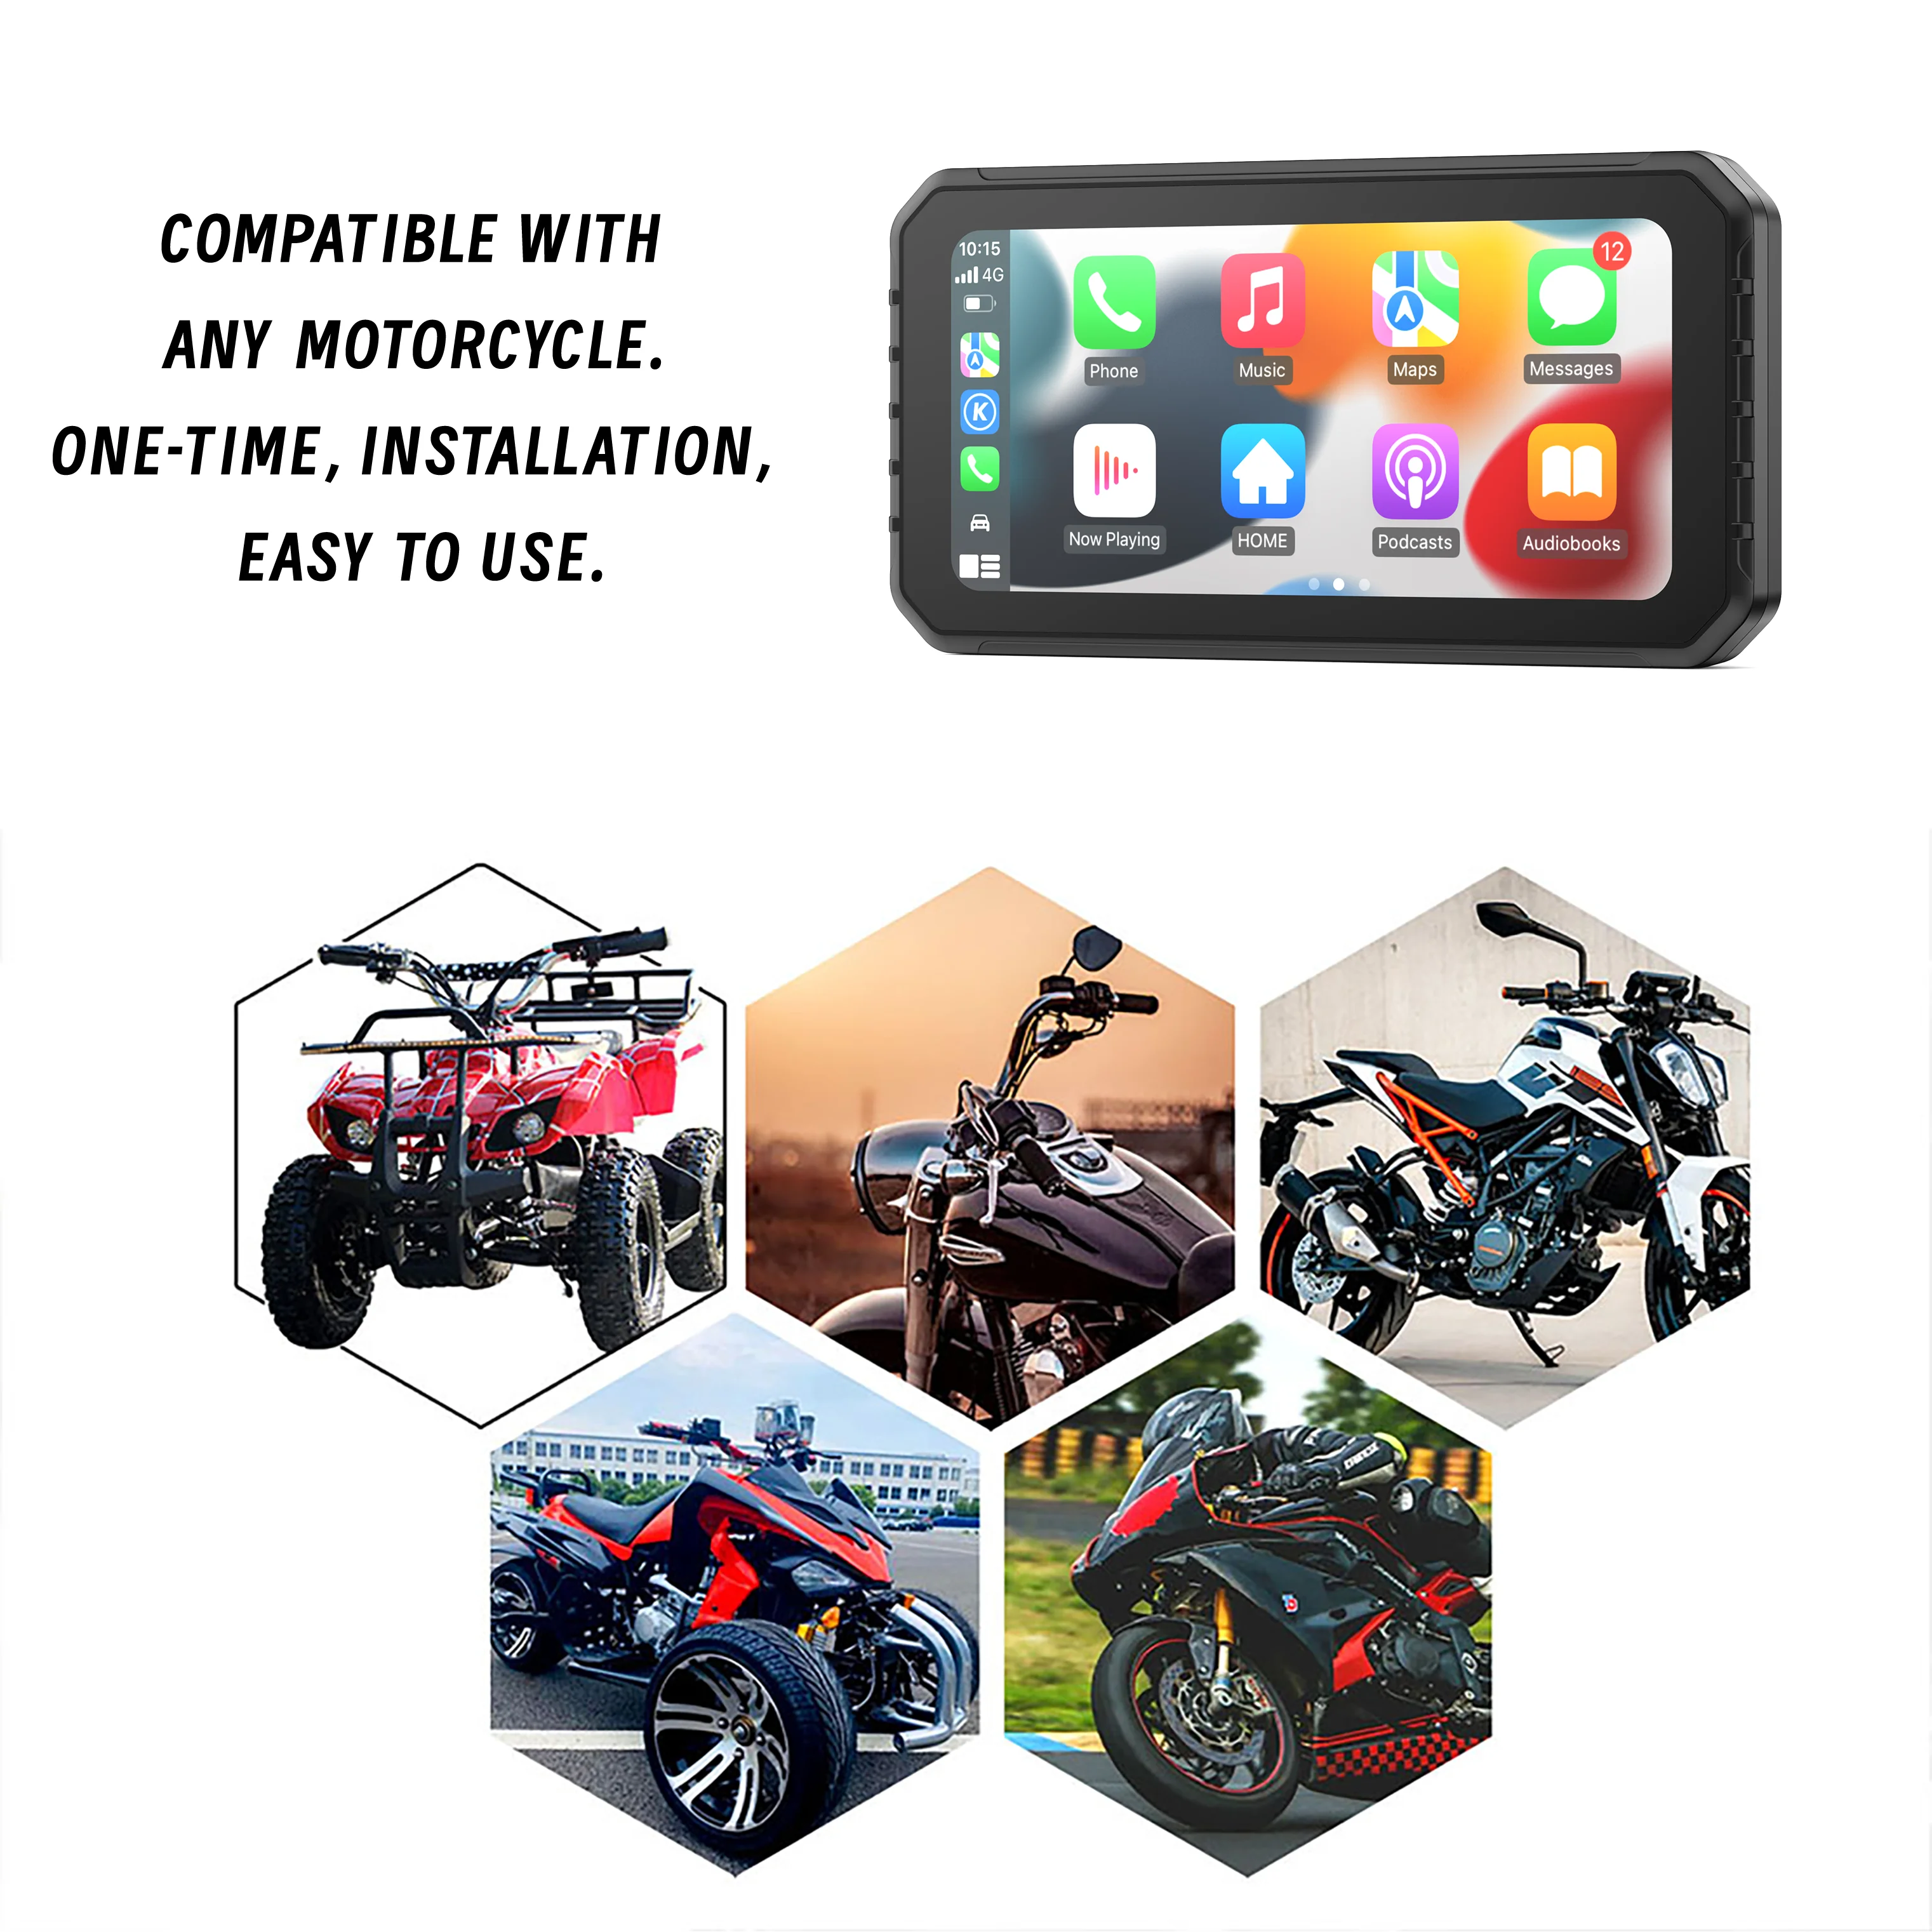 Spedal CL875 Wireless CarPlay＆Android Auto Motorcycle IP65 Waterproof Siri Google Voice Control Navigation 6.25Inch Touch Screen